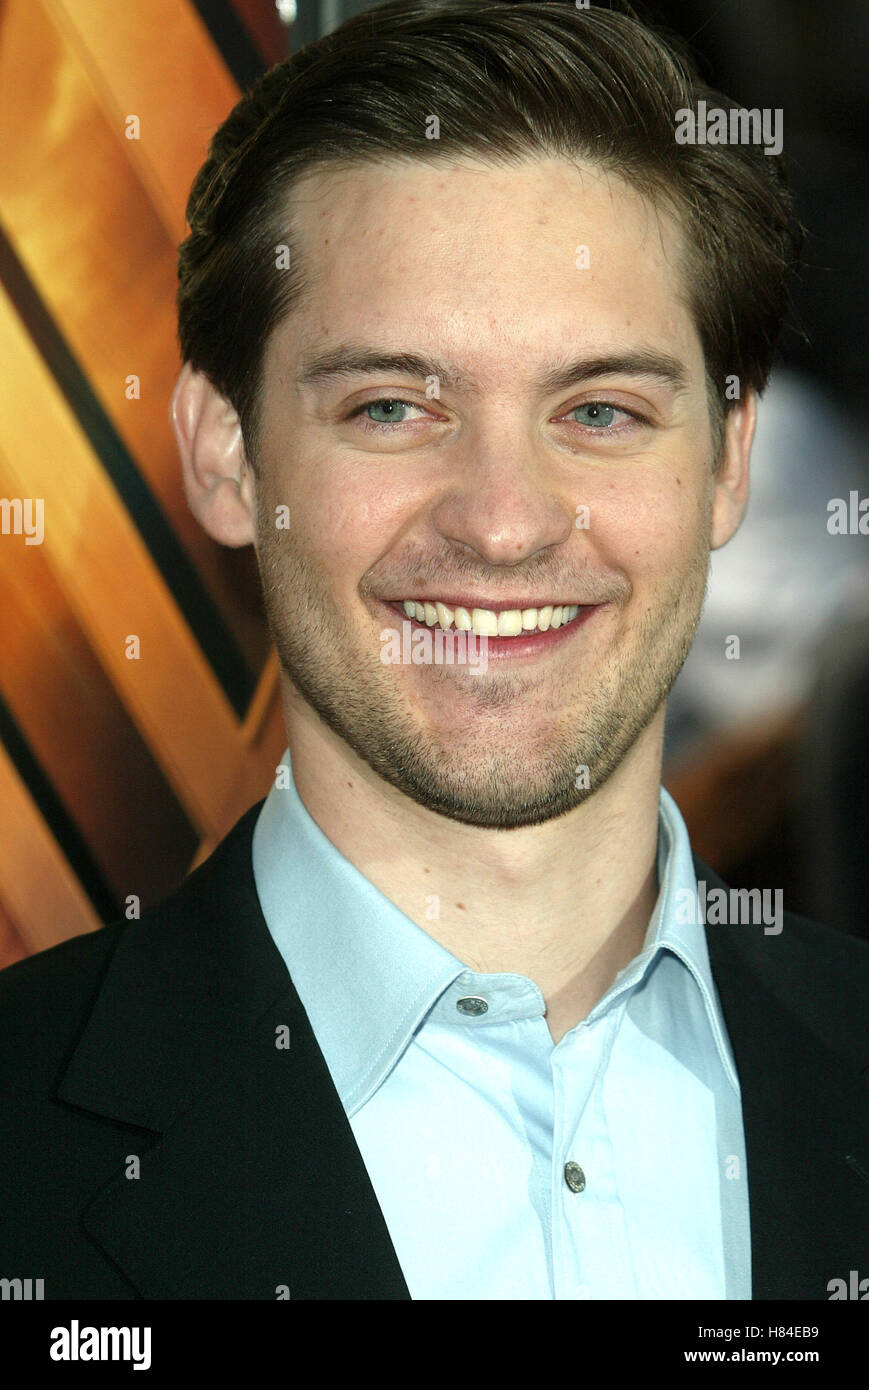 TOBEY MAGUIRE SPIDER-MAN FILM PREMIERE WESTWOOD LOS ANGELES USA 29 April 2002 Stock Photo